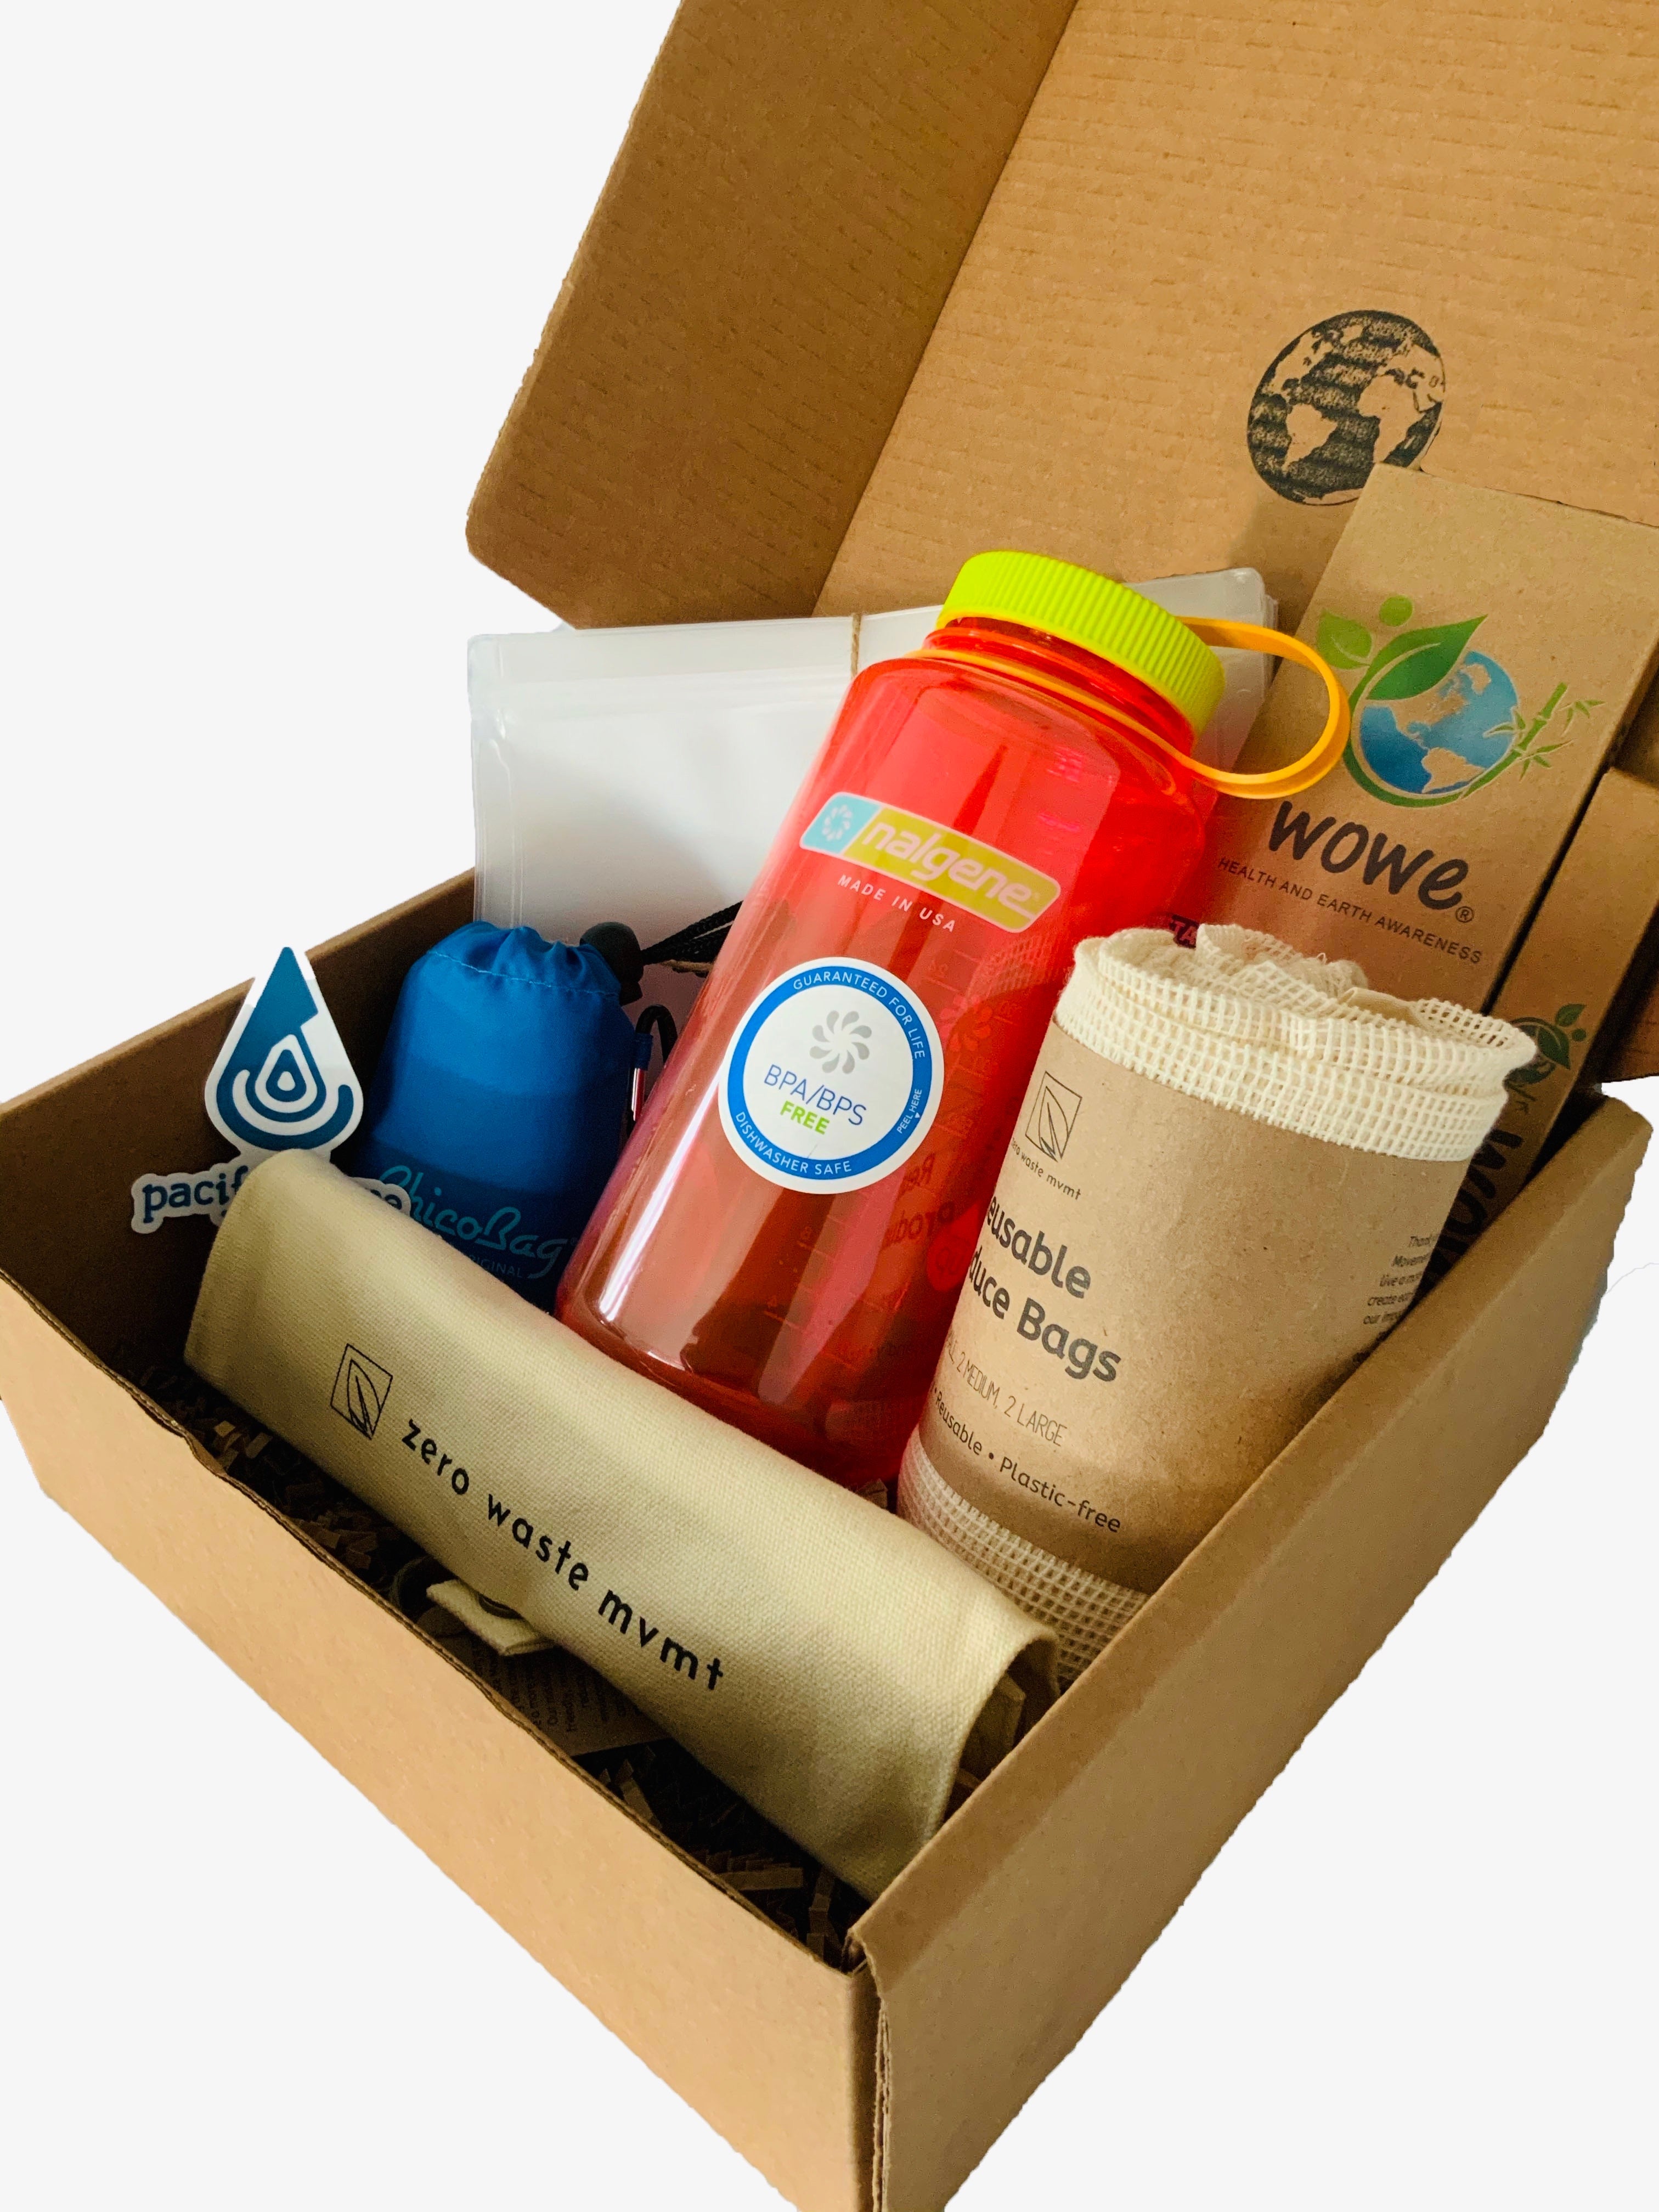 Reusable, Sustainable & BPA Free Lunch Gear Products